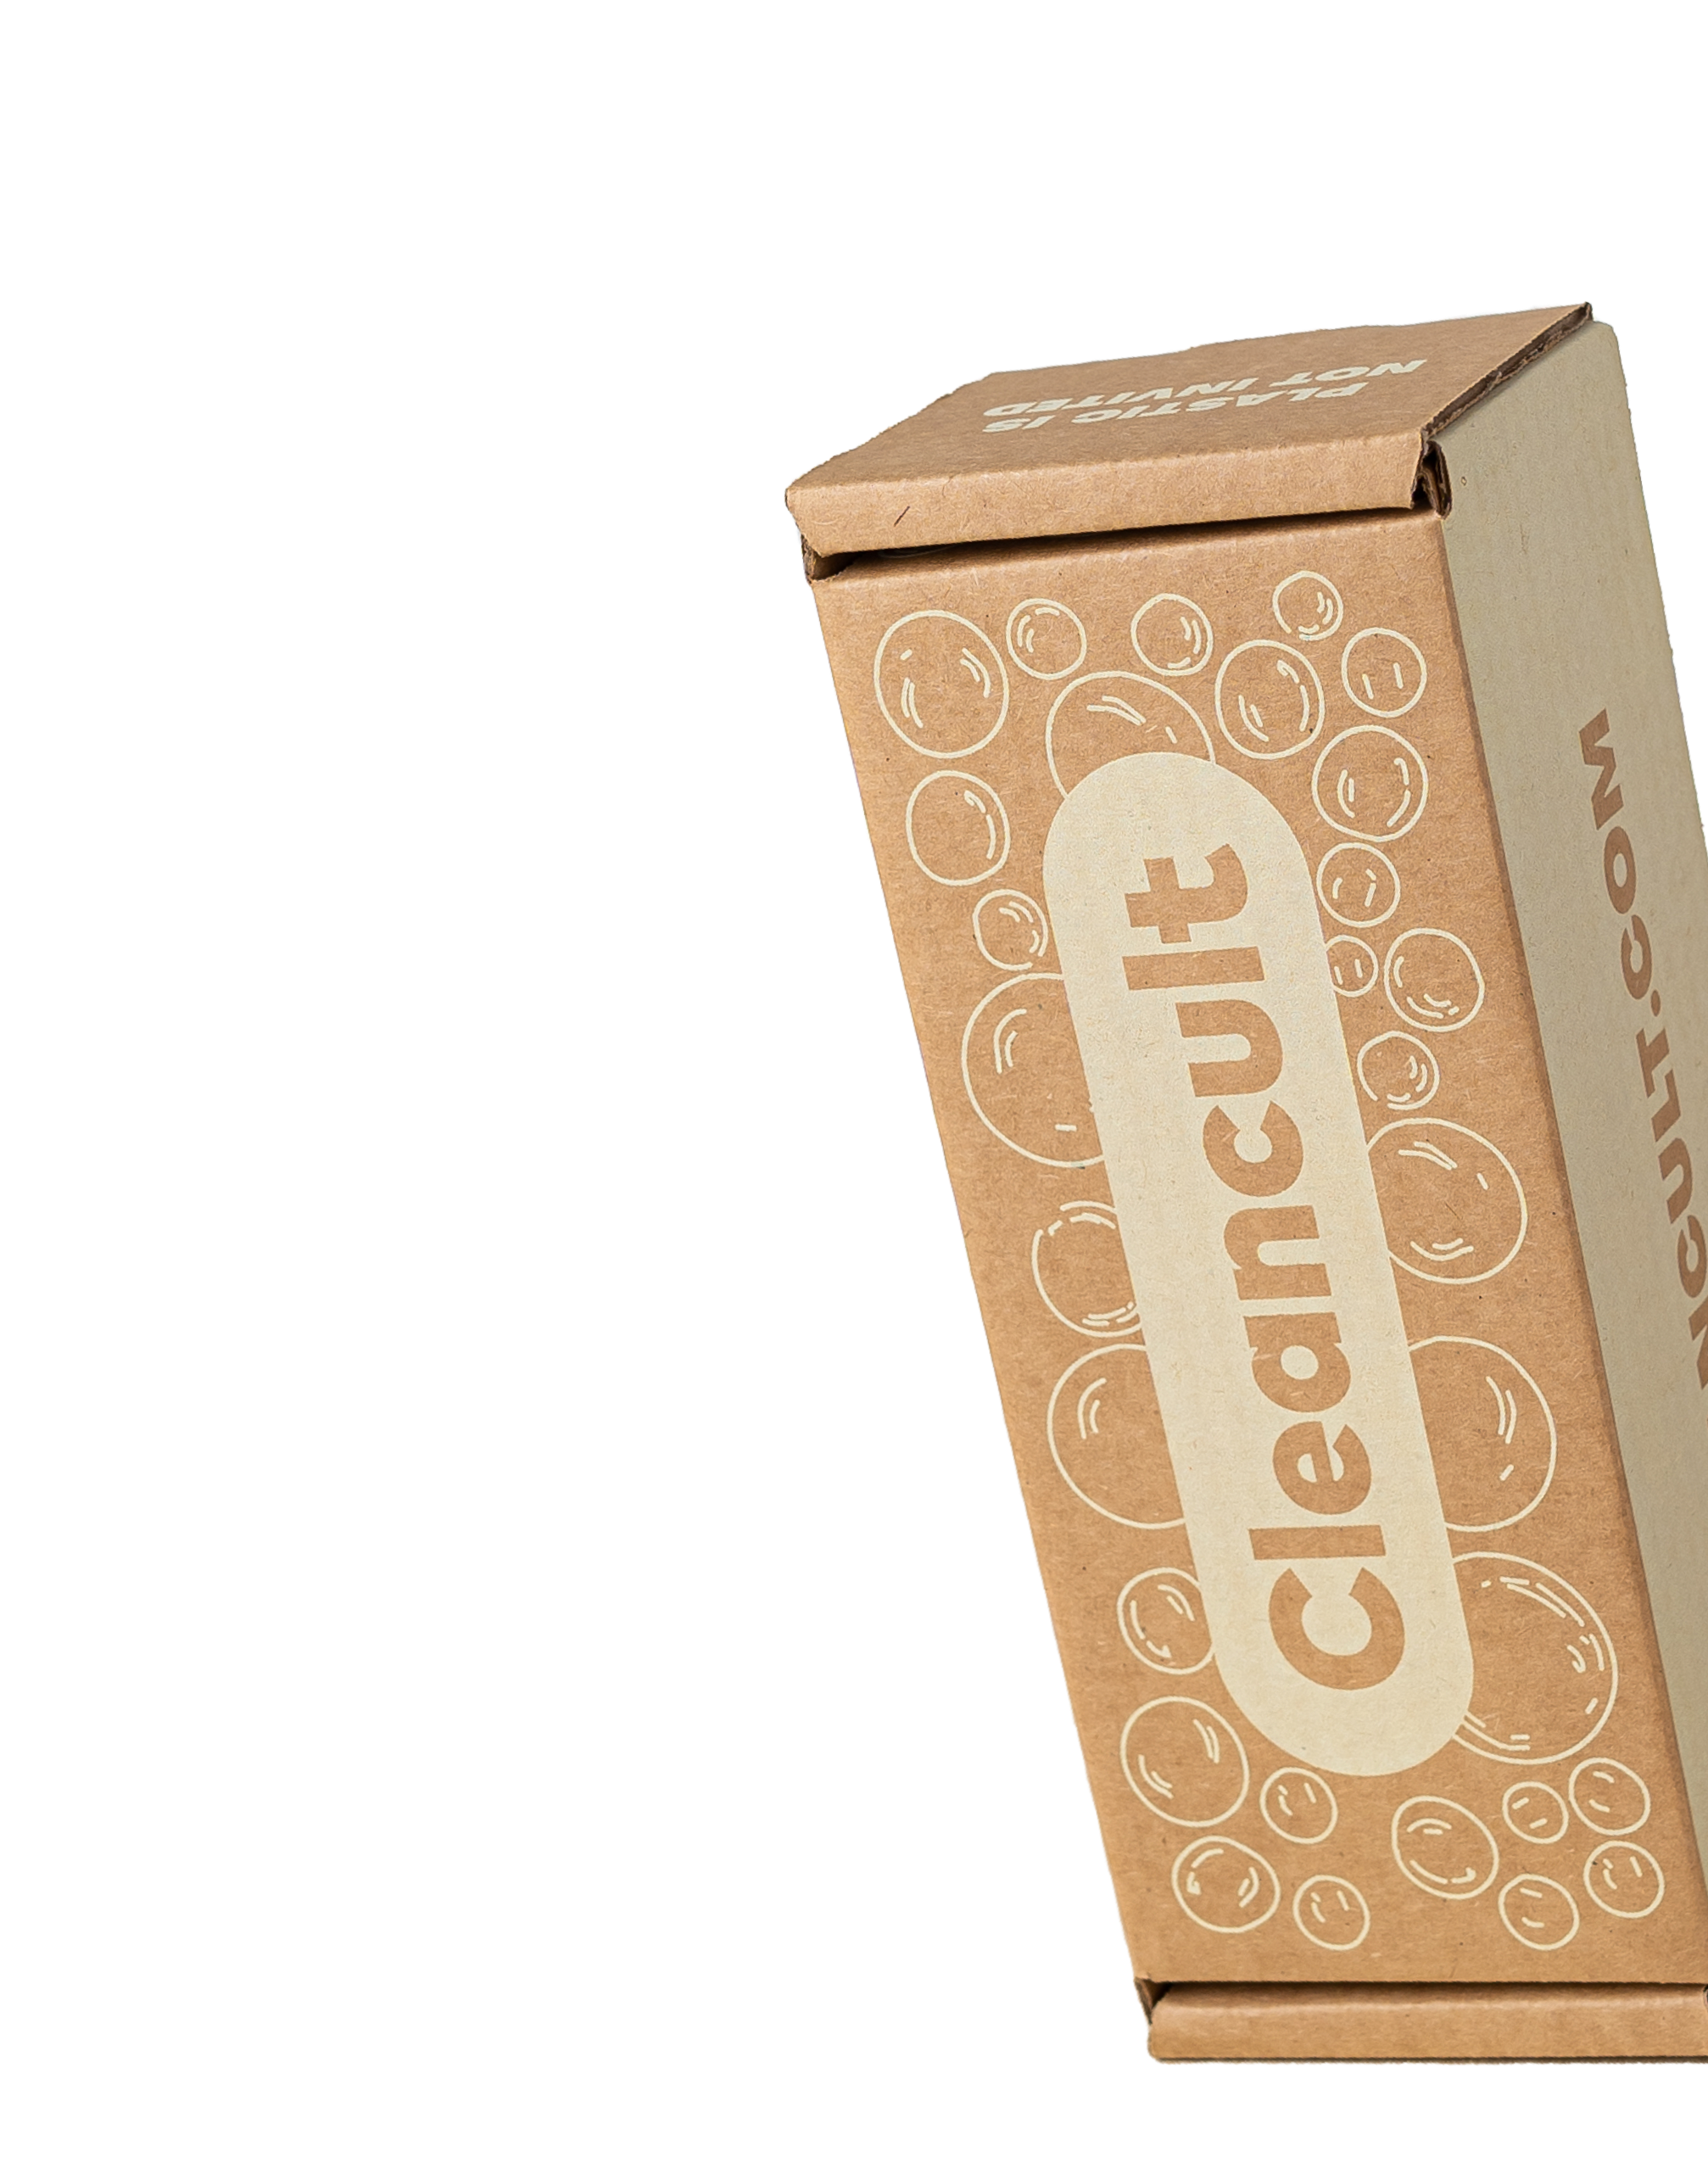 Paper Based Cartons